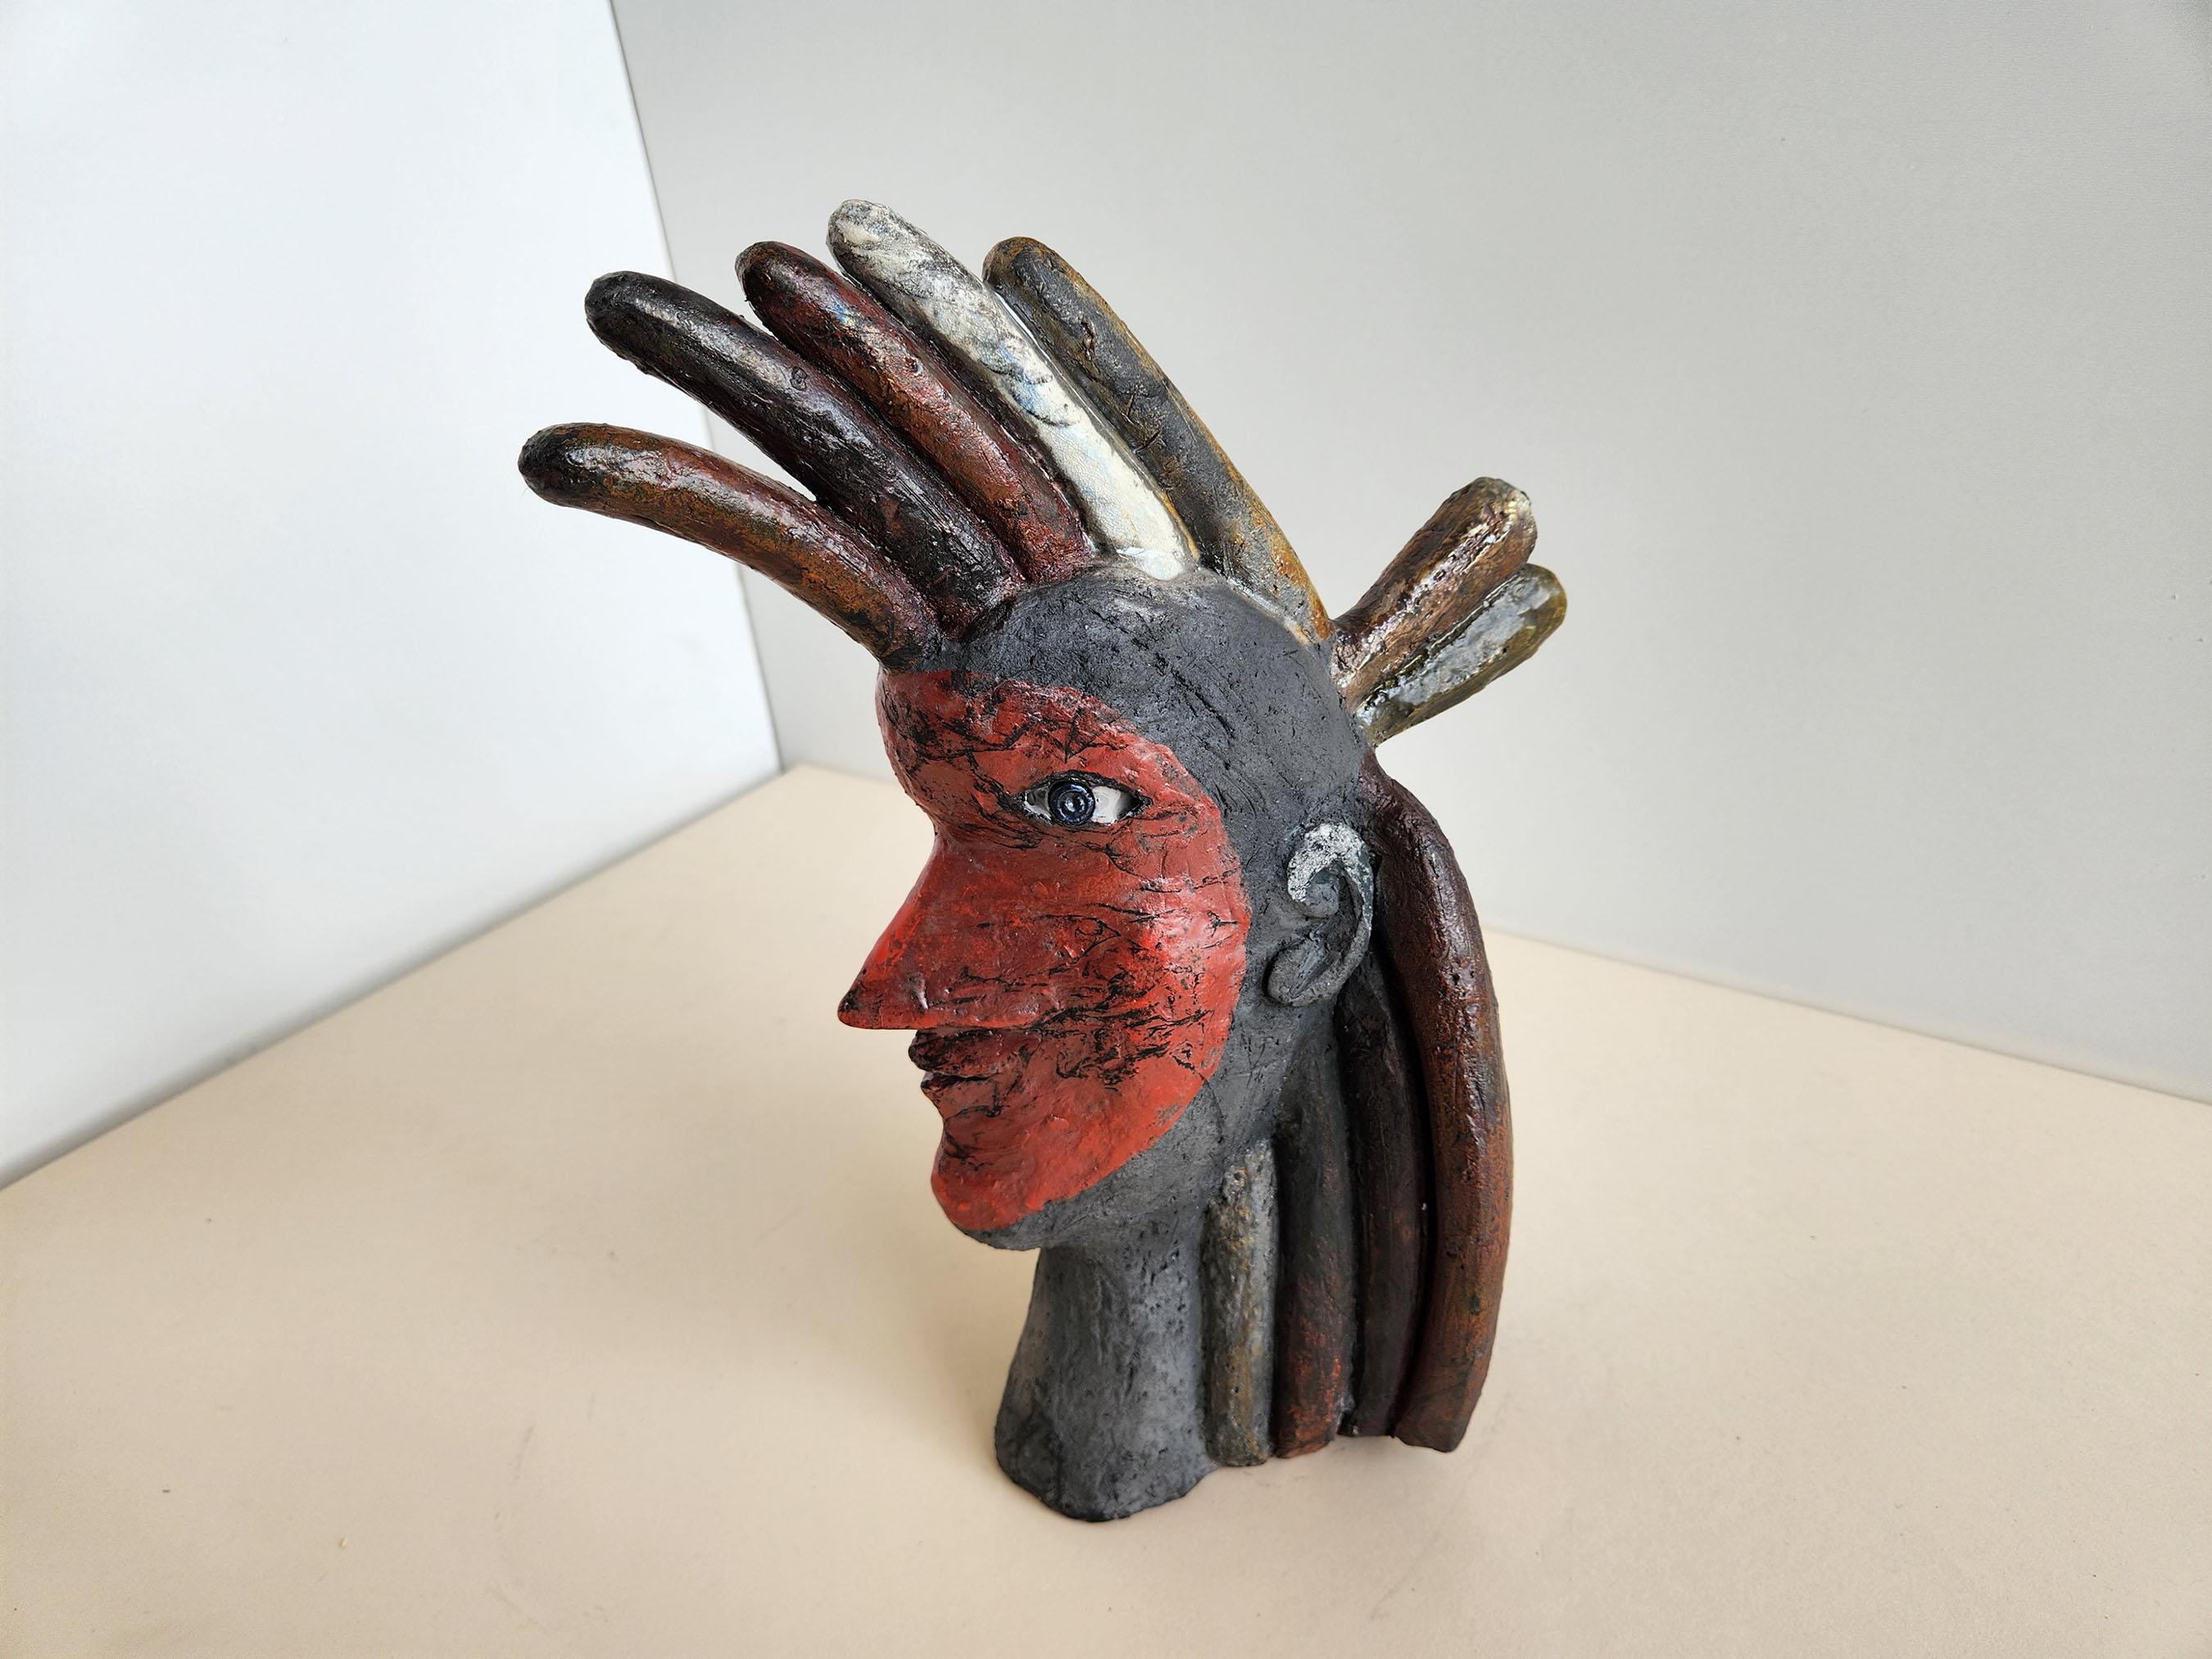 Vintage ceramic sculpture of Indian head by Roger Capron.
Signed by Capron Vallauris, France.

Roger Capron was in influential French ceramicist, known for his tiled tables and his use of recurring motifs such as stylized branches and geometrical